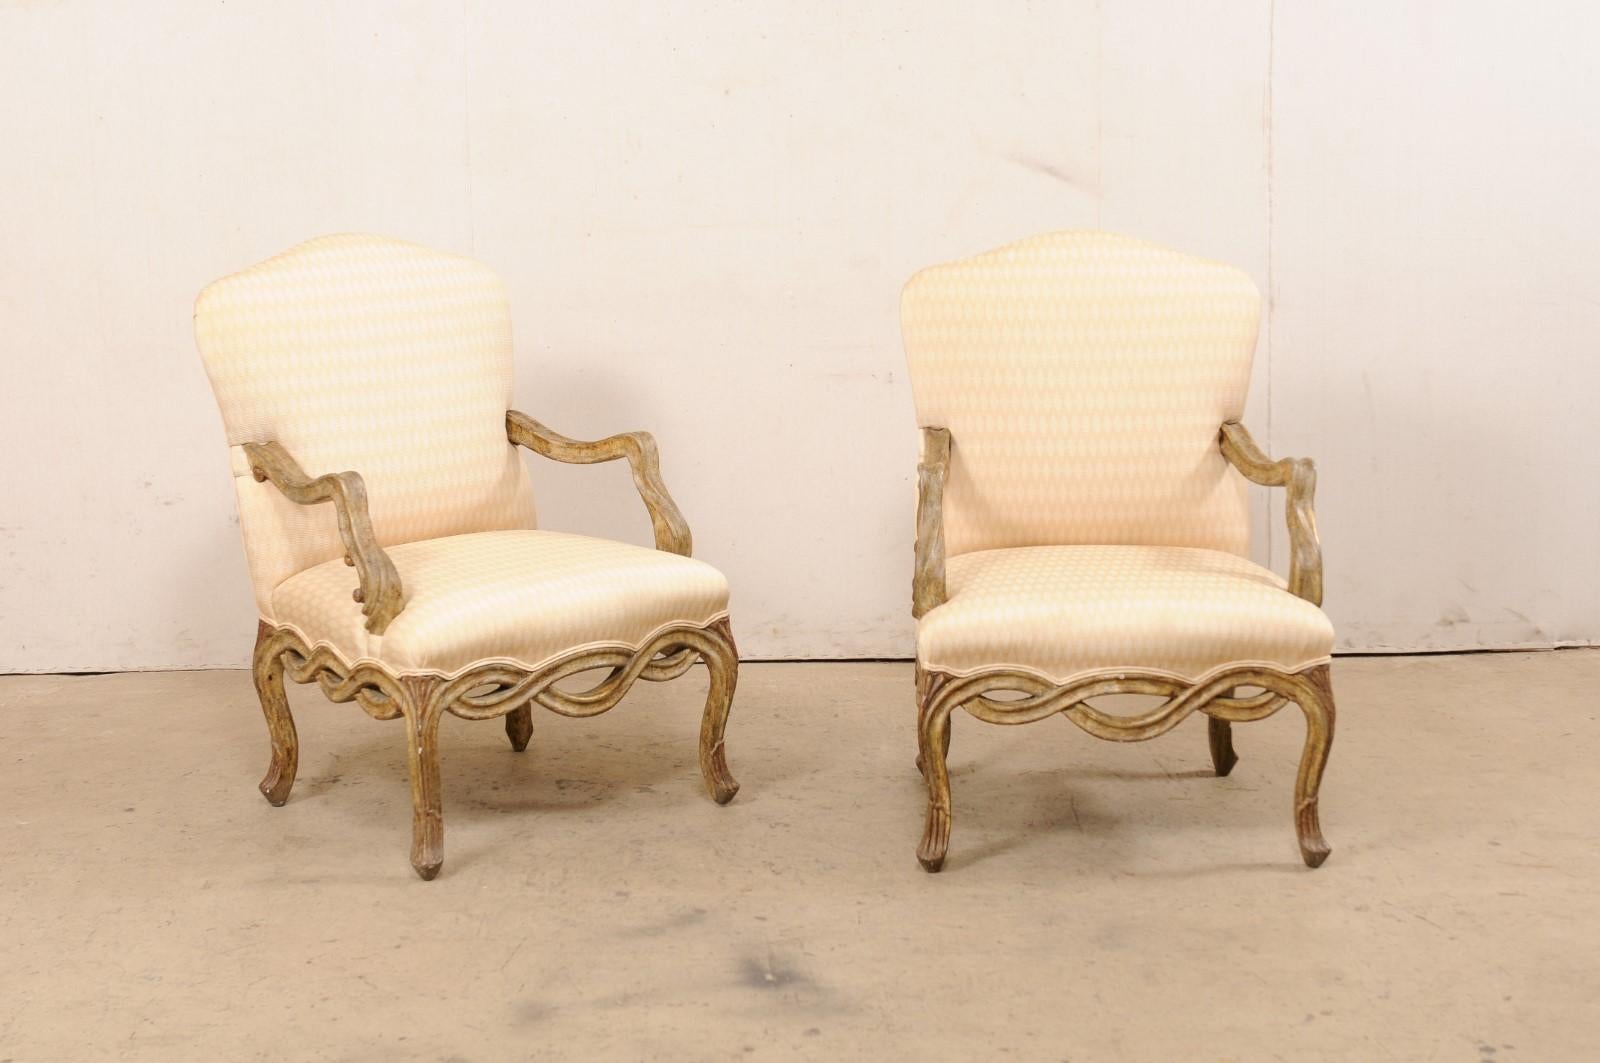 A vintage pair of American carved-wood and upholstered armchairs. These vintage chairs have been carved with Venetian-style influences, with beautifully carved-wood arms that have c-scroll accents, and the pierce-carved and intertwining ribbon that